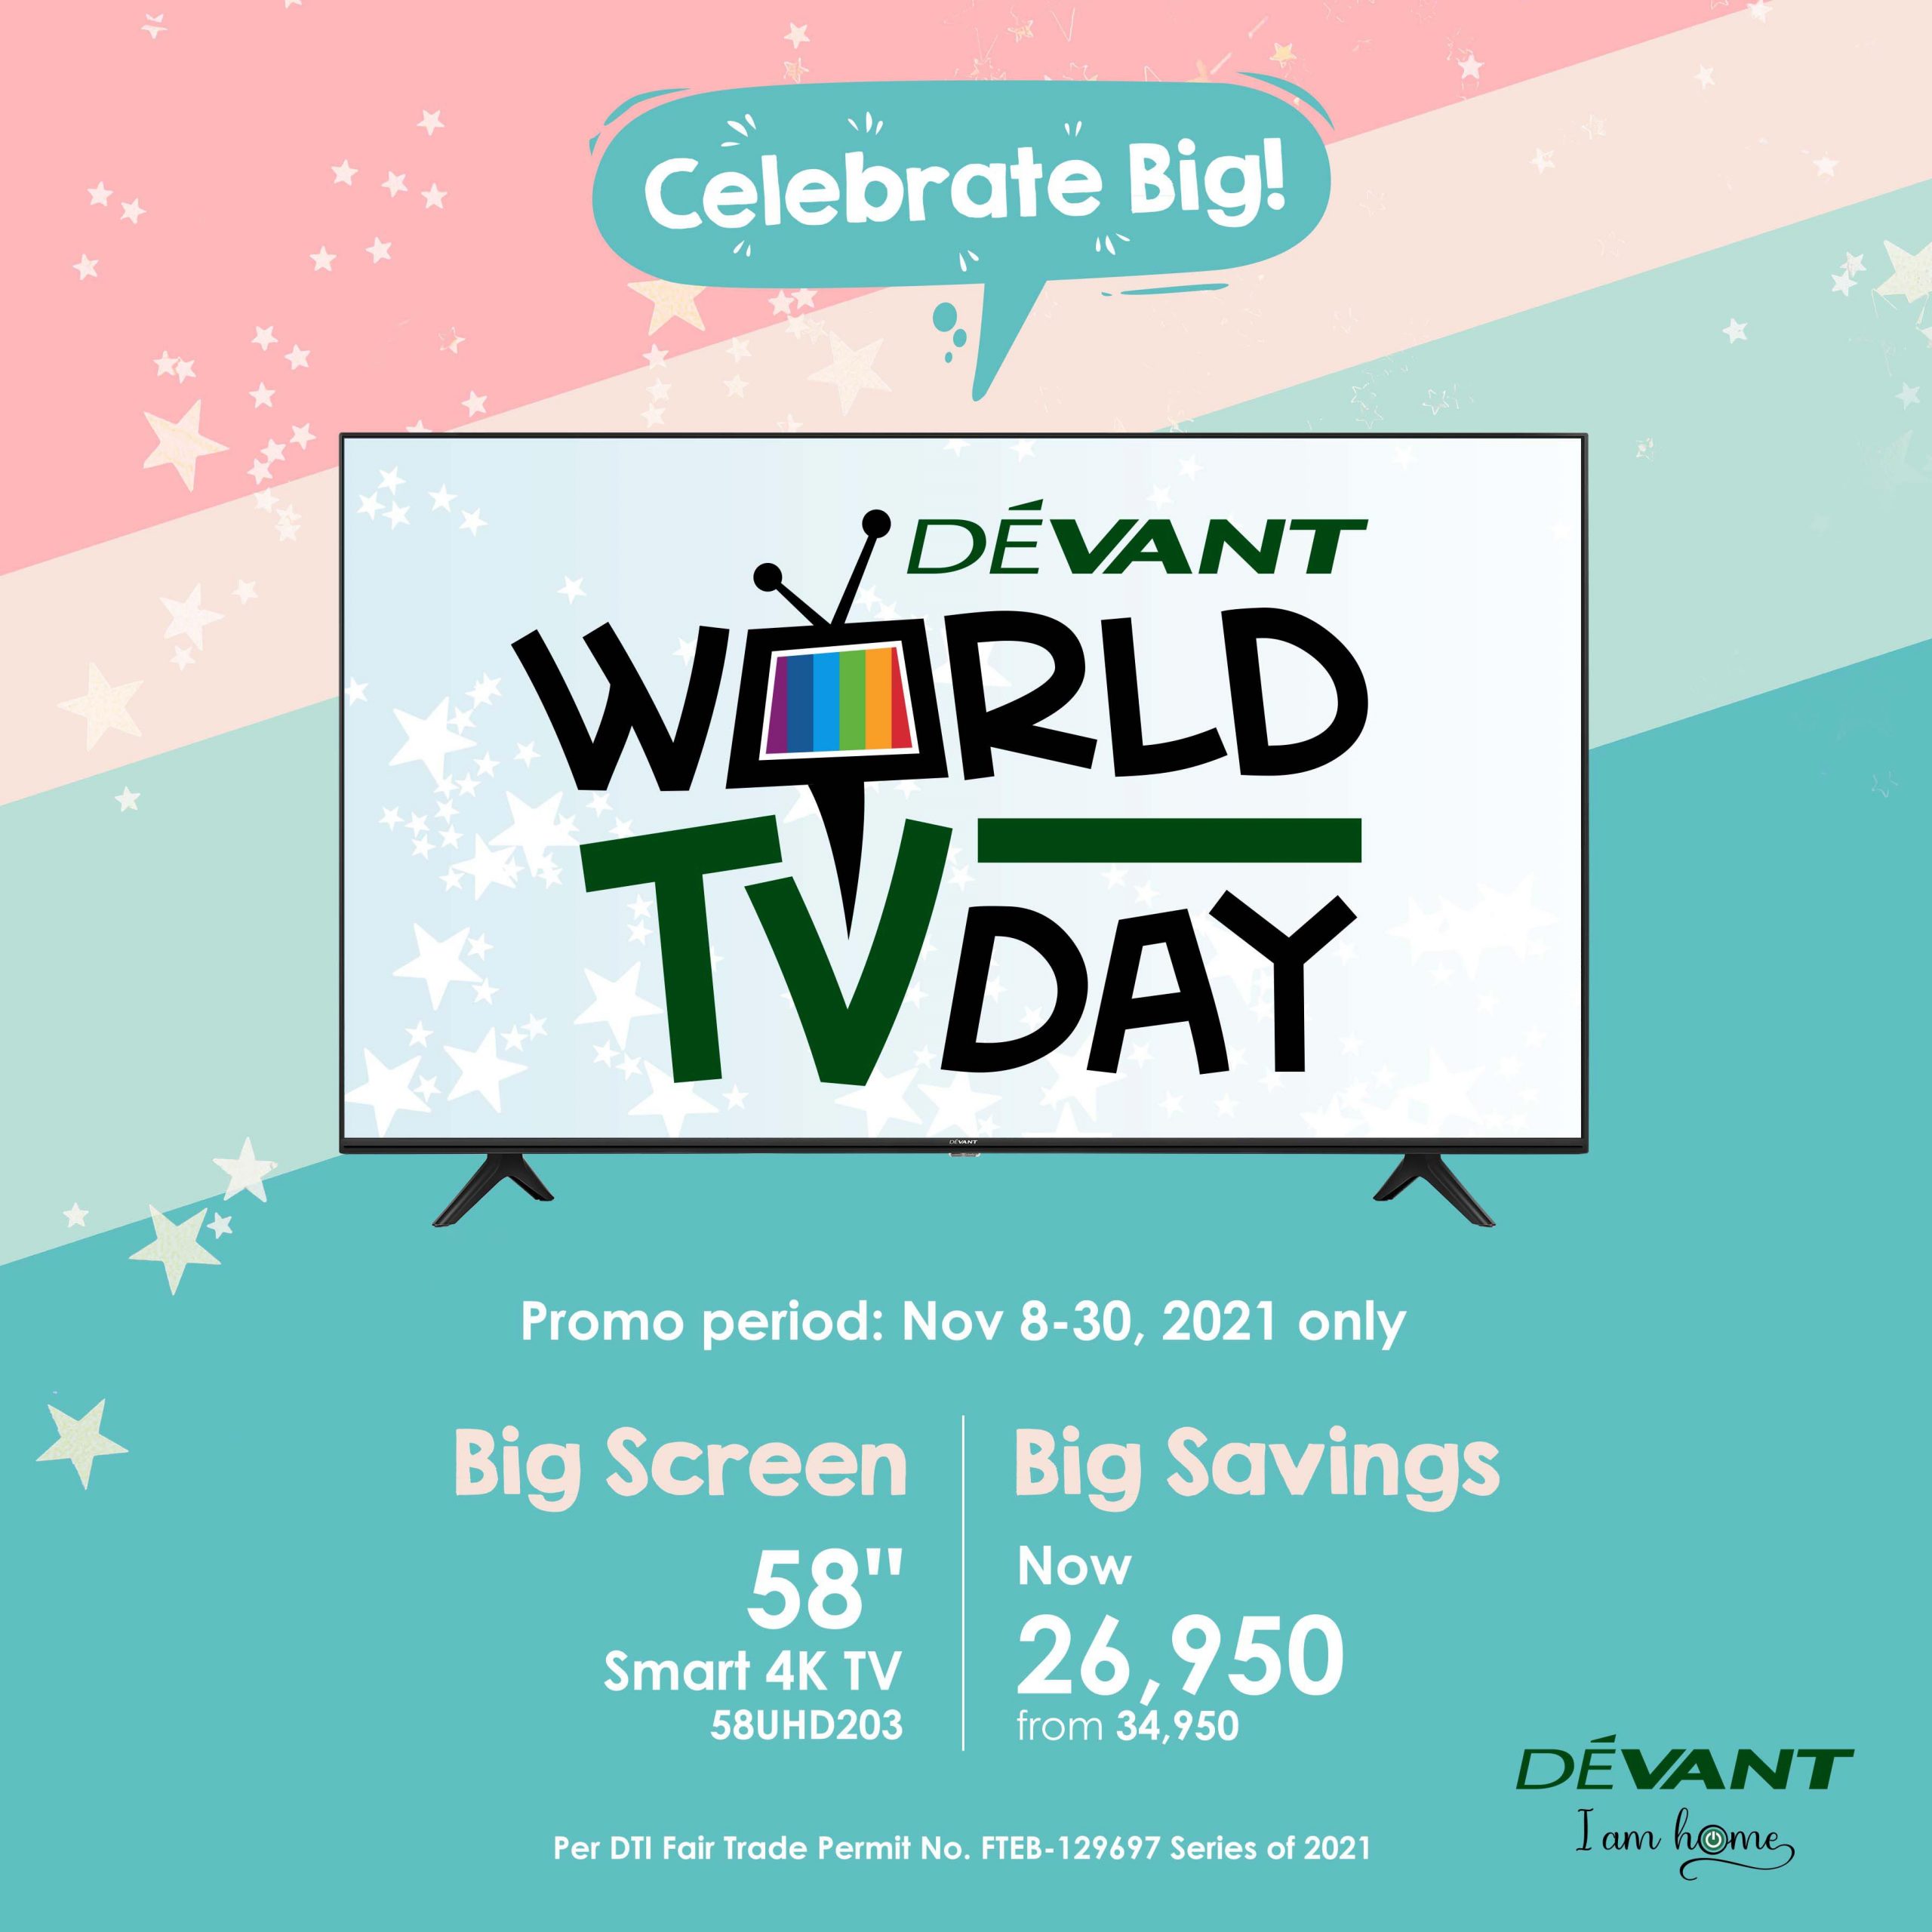 Celebrate World TV Day with Devant by Sharing Unforgettable TV Bonding Moments With Family and Friends